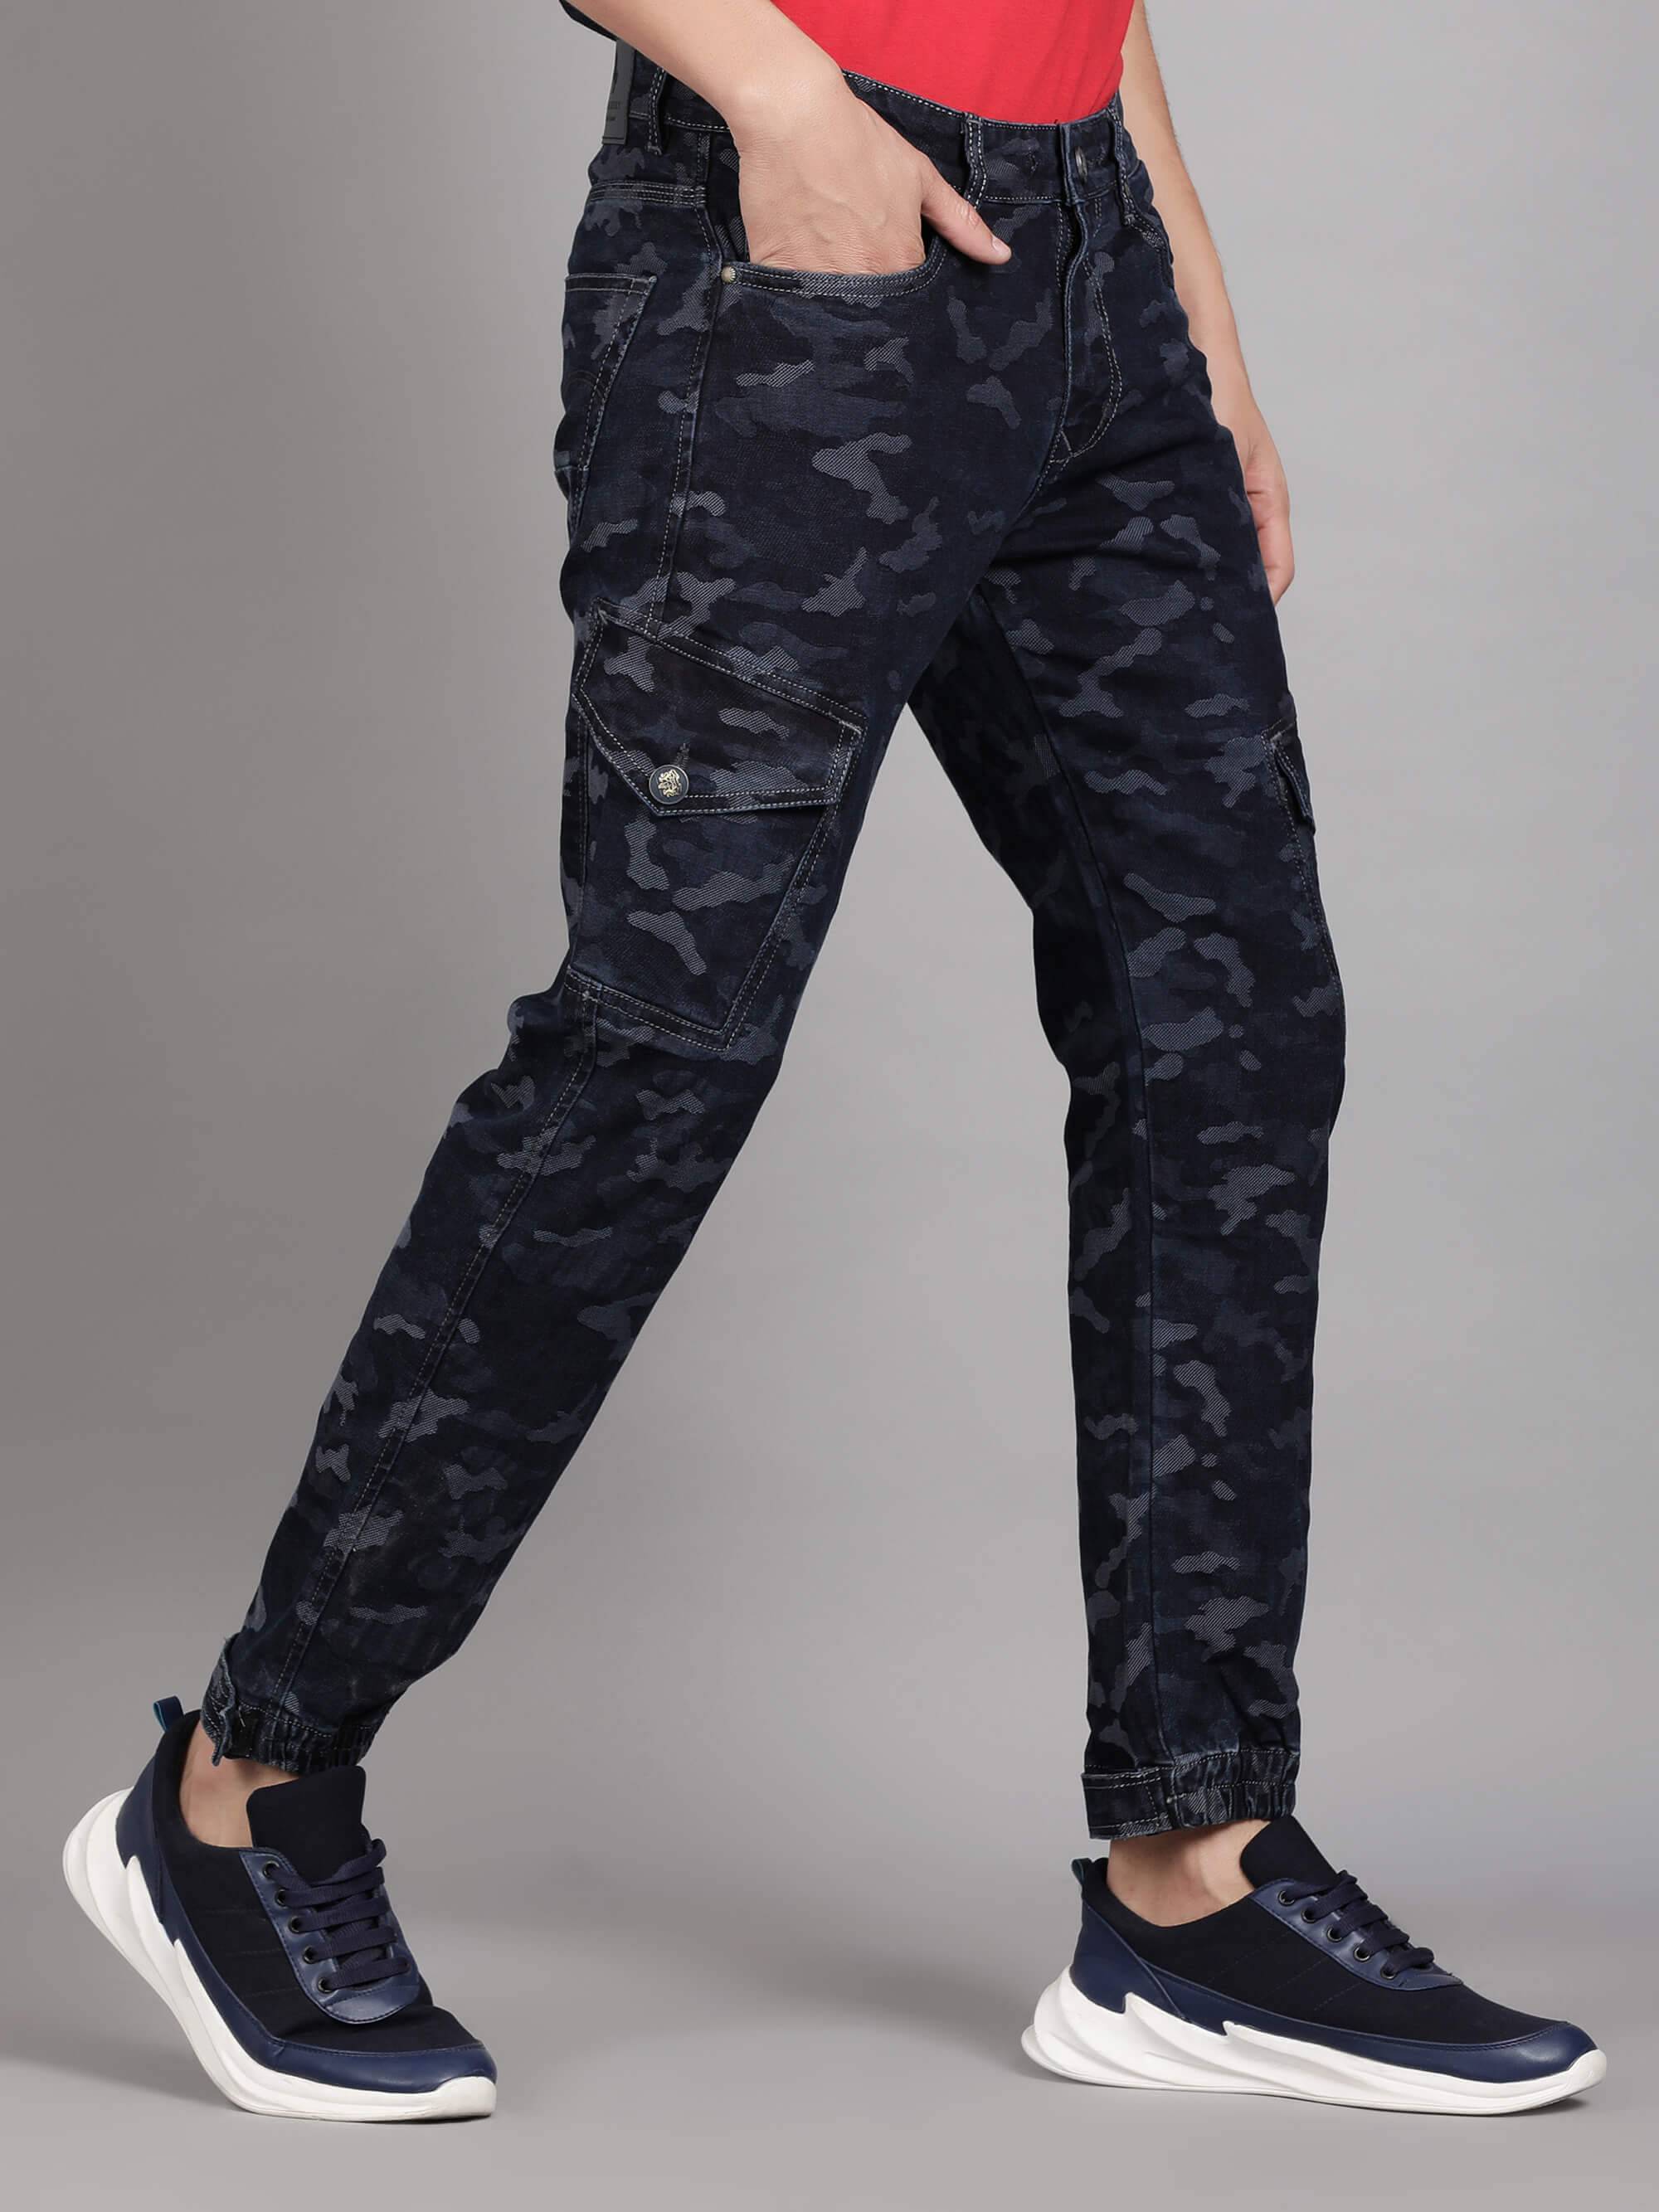 Loose-Fit Men's Camouflage Cargo Denim Jeans With Pockets | SHEIN USA